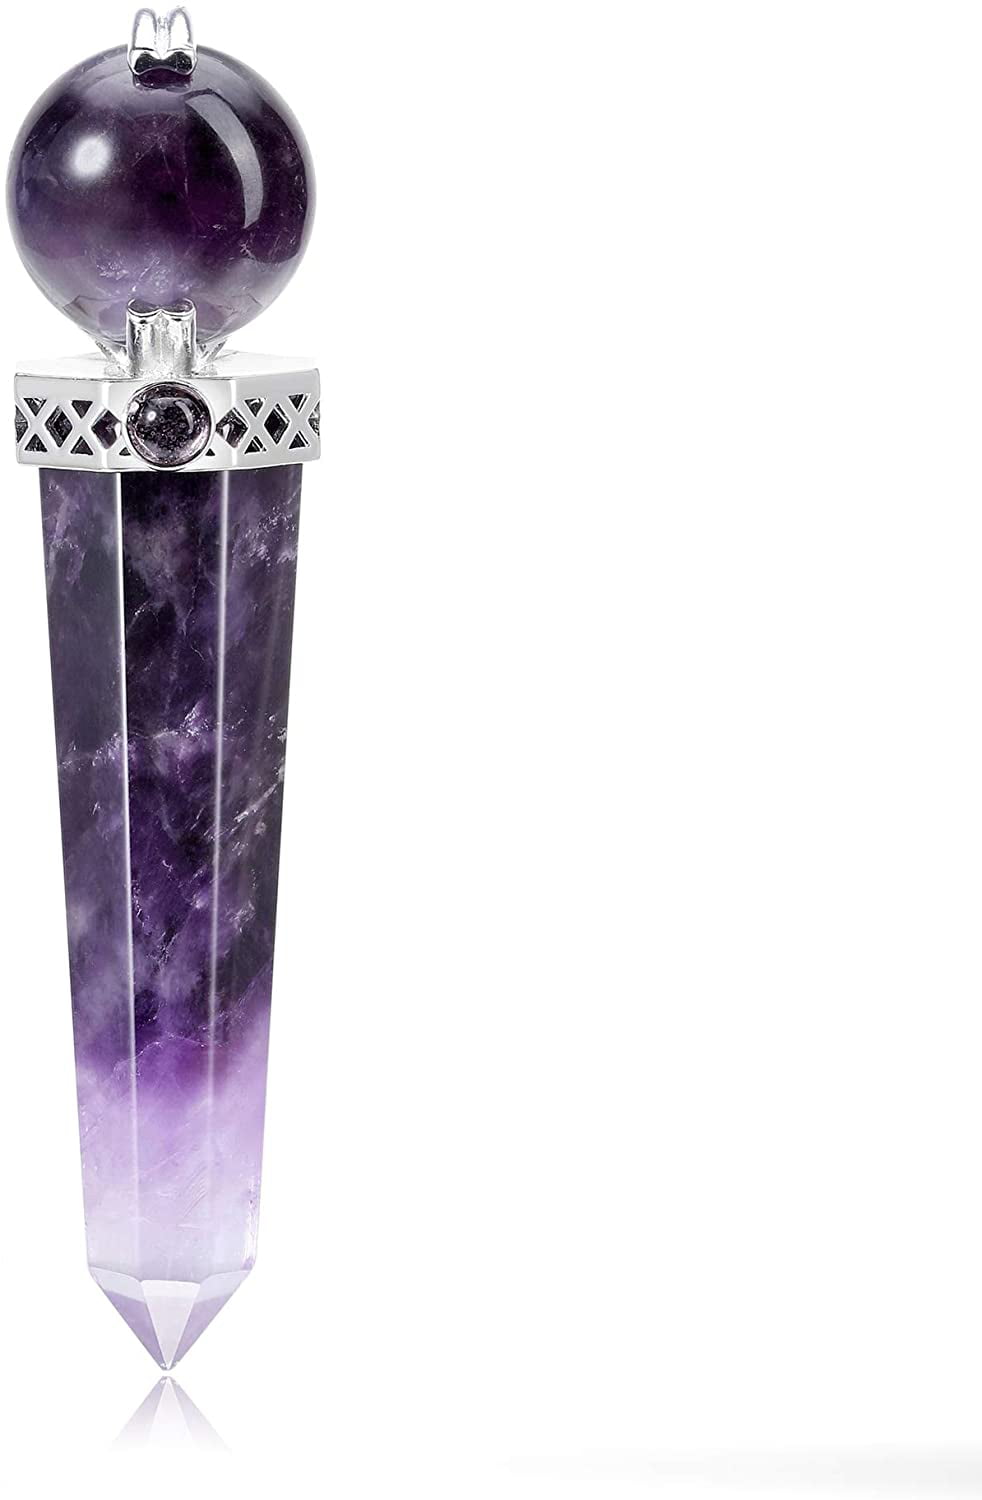 JUST IN STONES Natural Amethyst Gemstone Crystal Hexagonal Pointed Reiki Chakra Faceted Prism Wand Stone Home Decor 